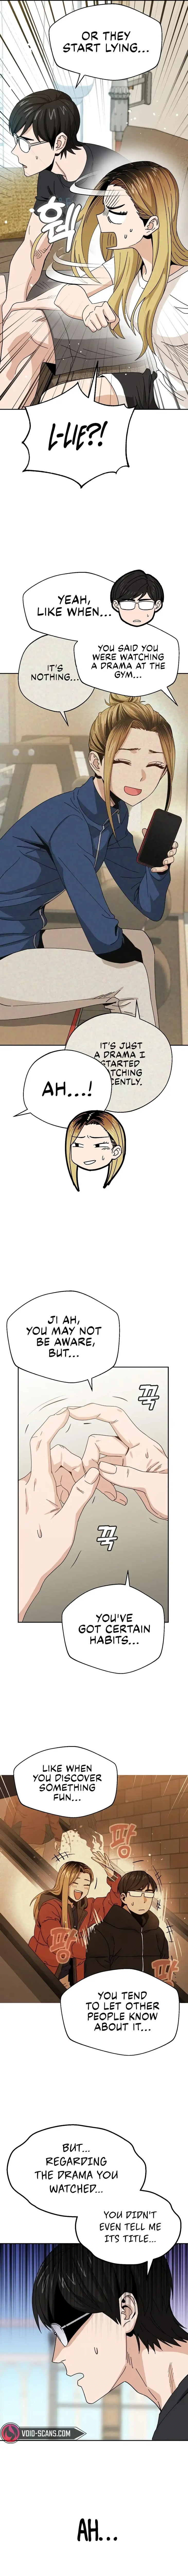 Match Made in Heaven by Chance chapter 39 - page 3